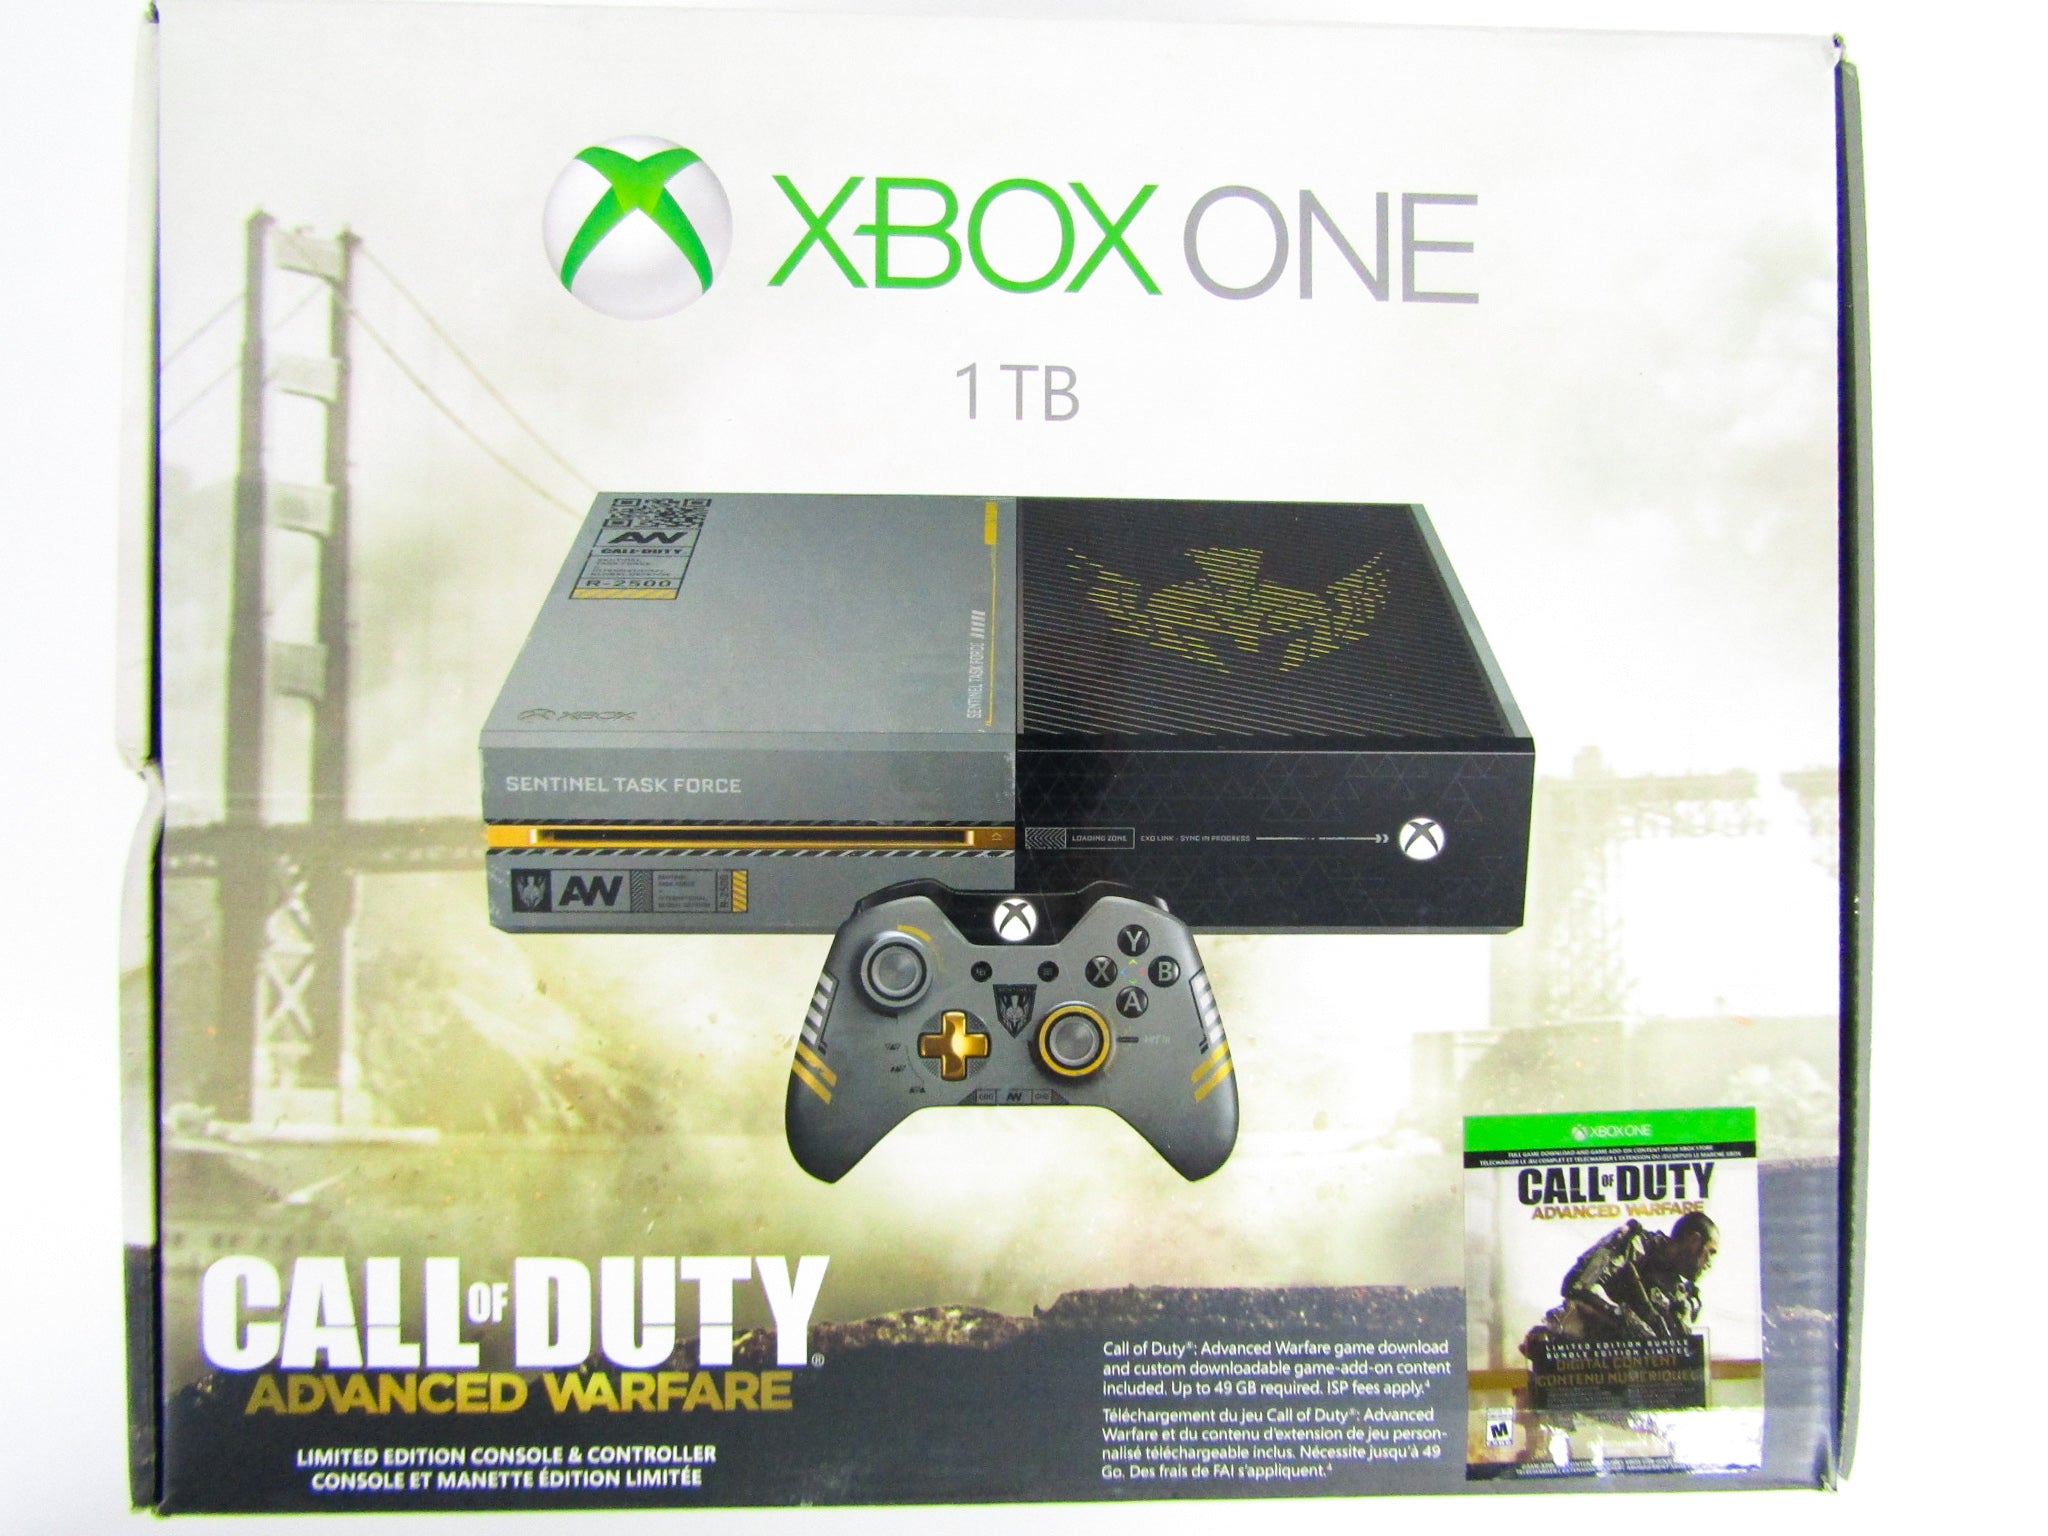 XboxOne 1TB CALL OF DUTY Limited Edition-